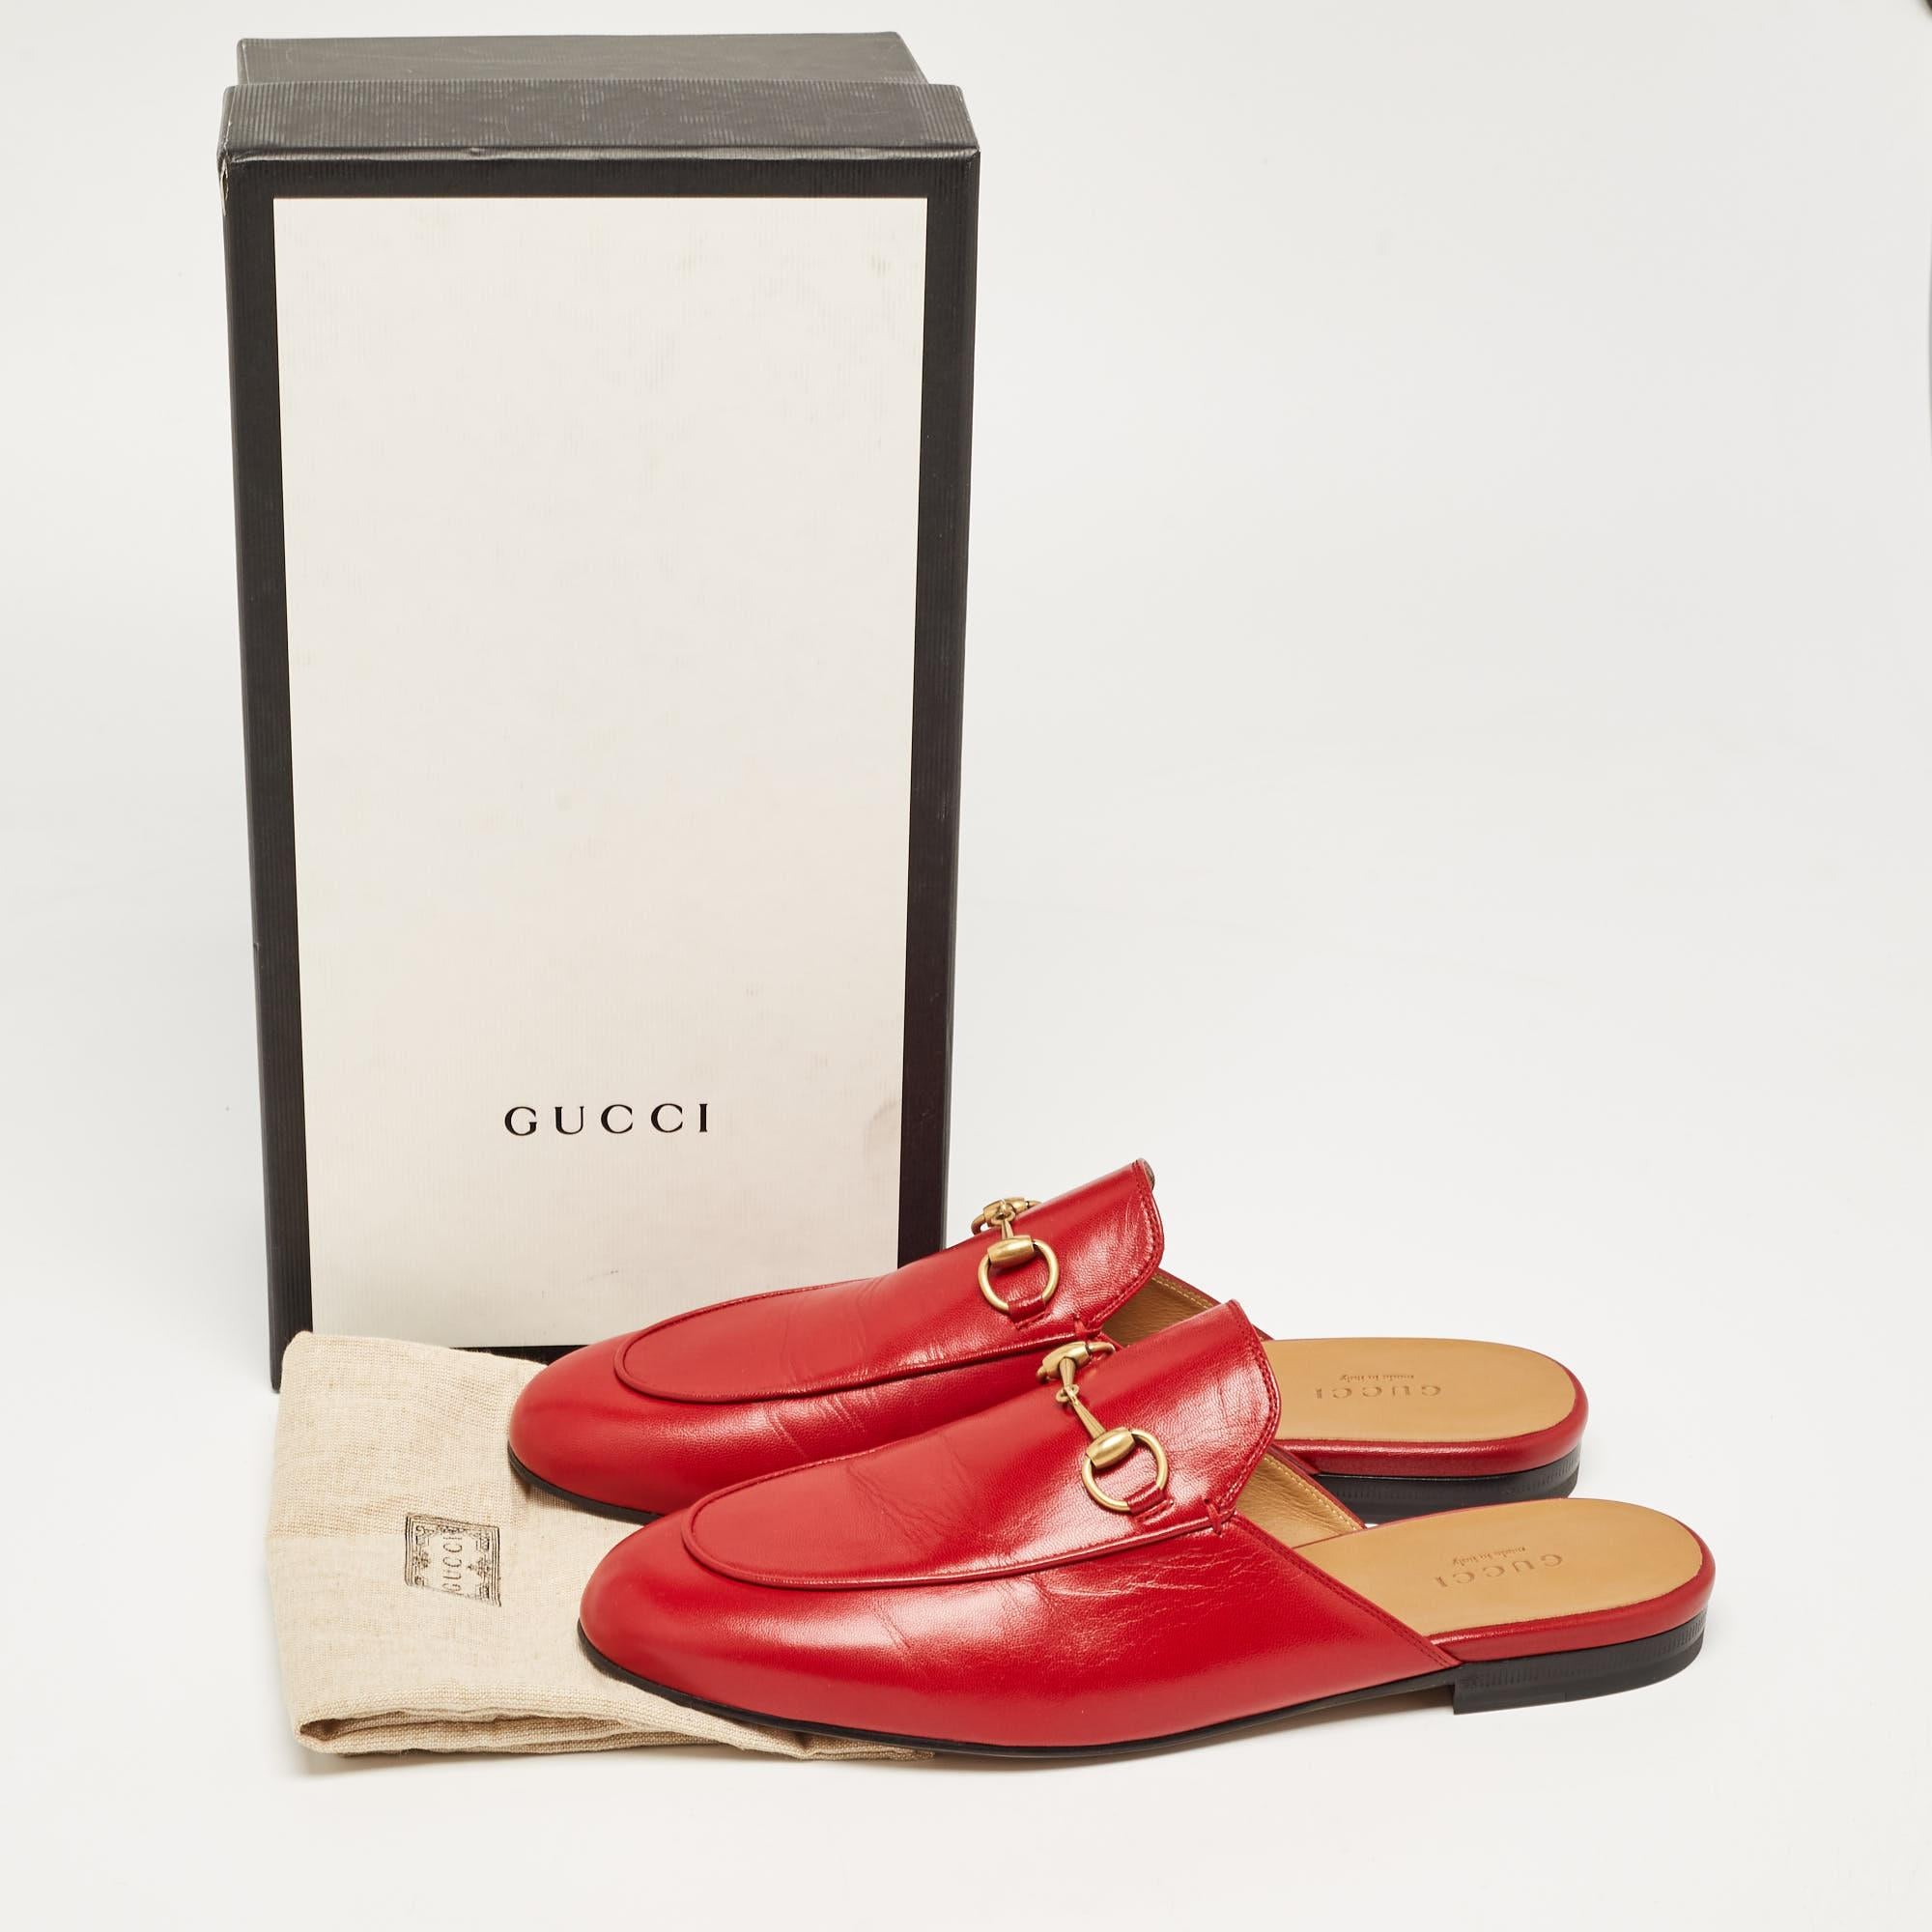 Gucci Red Leather Princetown Flat Mules Size 38.5 3